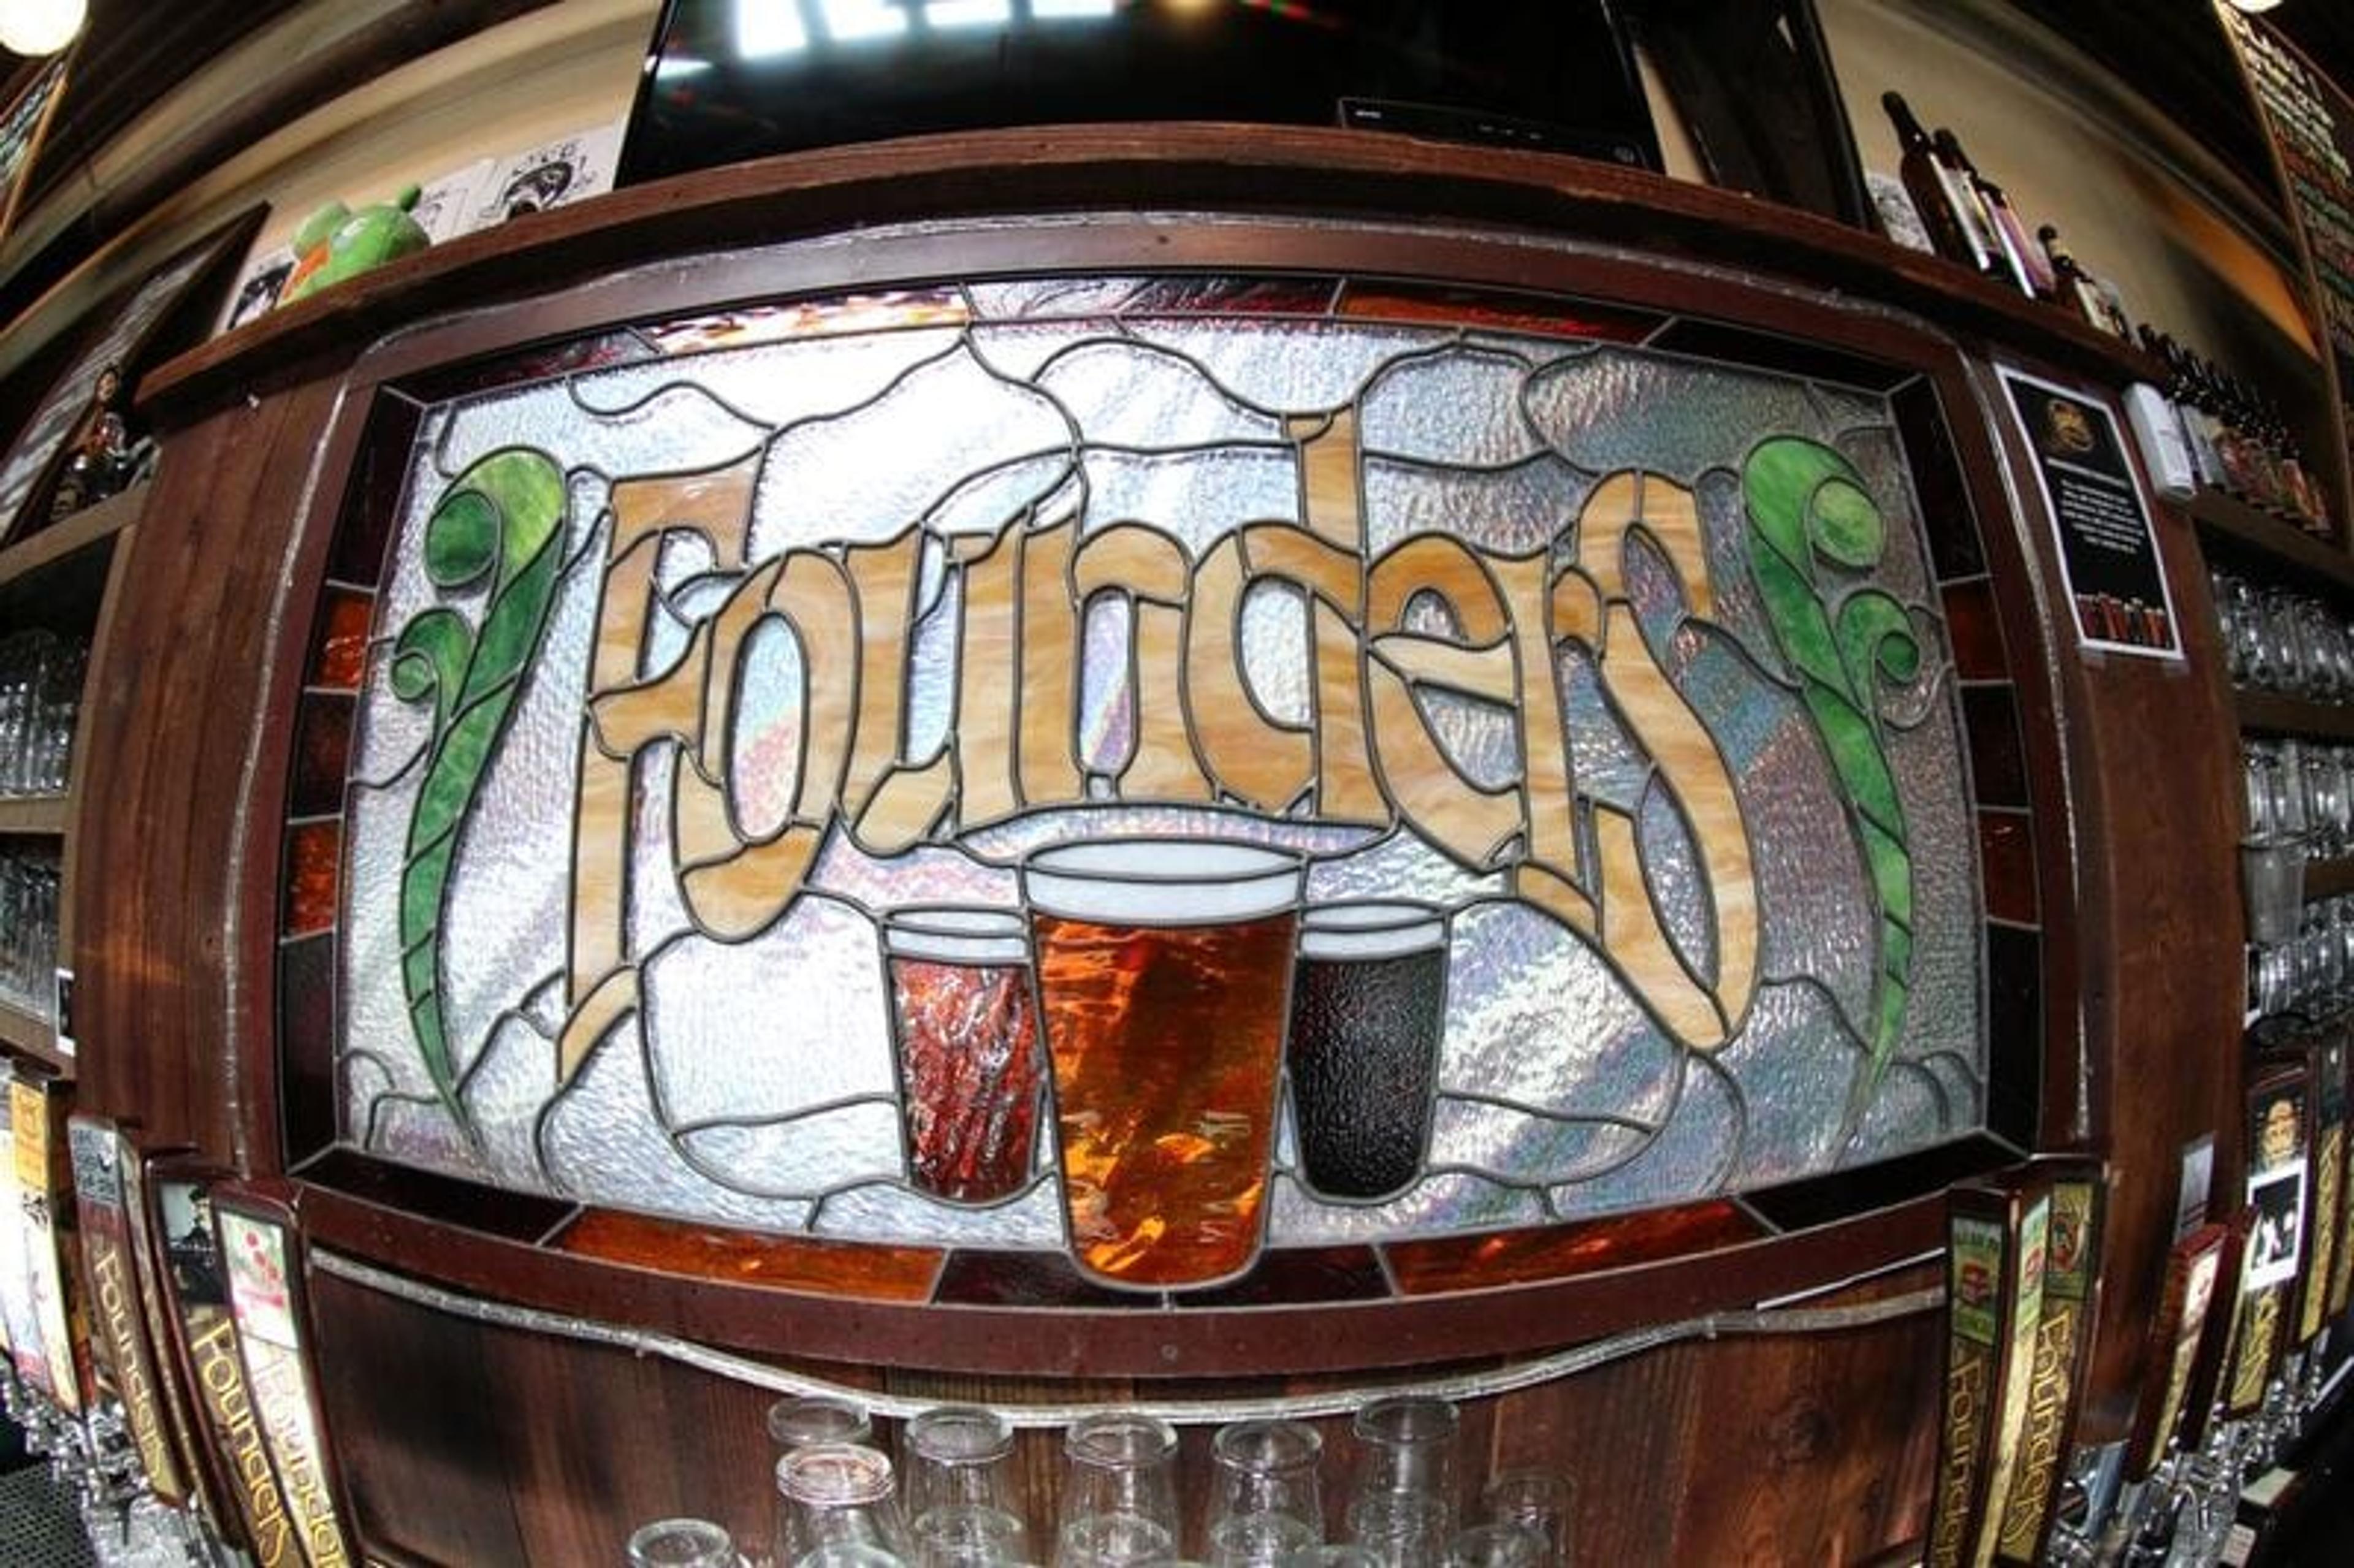 Stained glass sign that says Founders with beer glasses